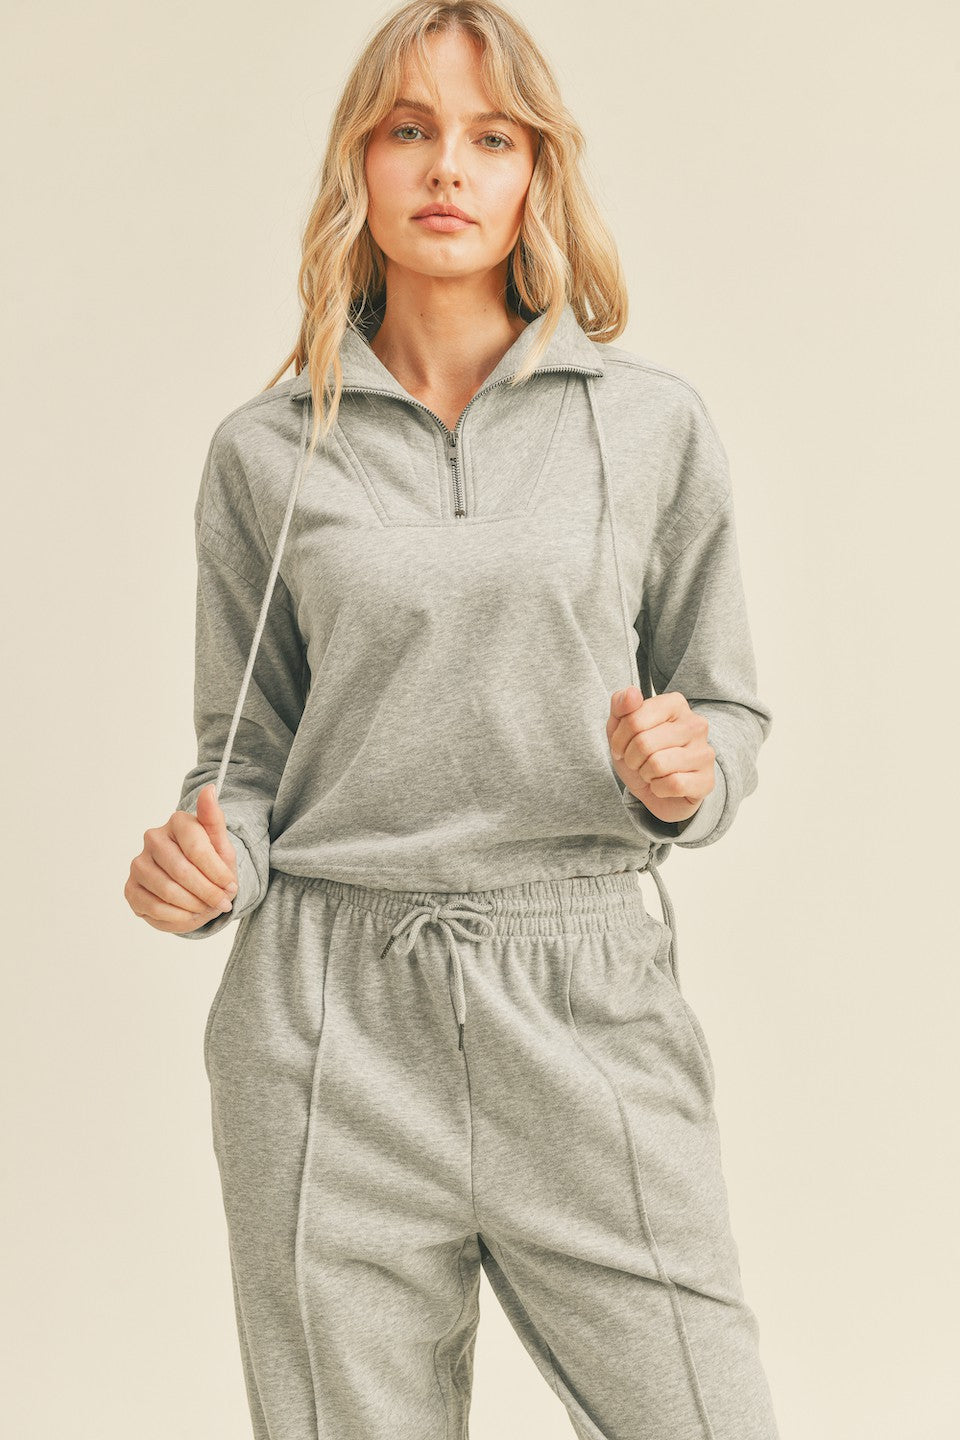 Crafted from soft cotton French terry fabric and featuring an indigo half zip closure, slightly cropped fit, drawstring hem, and a chic flattering silhouette. This pullover is truly the ideal piece of activewear that's perfect for your daily routine! Look good, feel great in the Cotton French Terry Cropped Pullover - designed with you in mind.  HPS  S - 20" M - 20.5" L - 21"